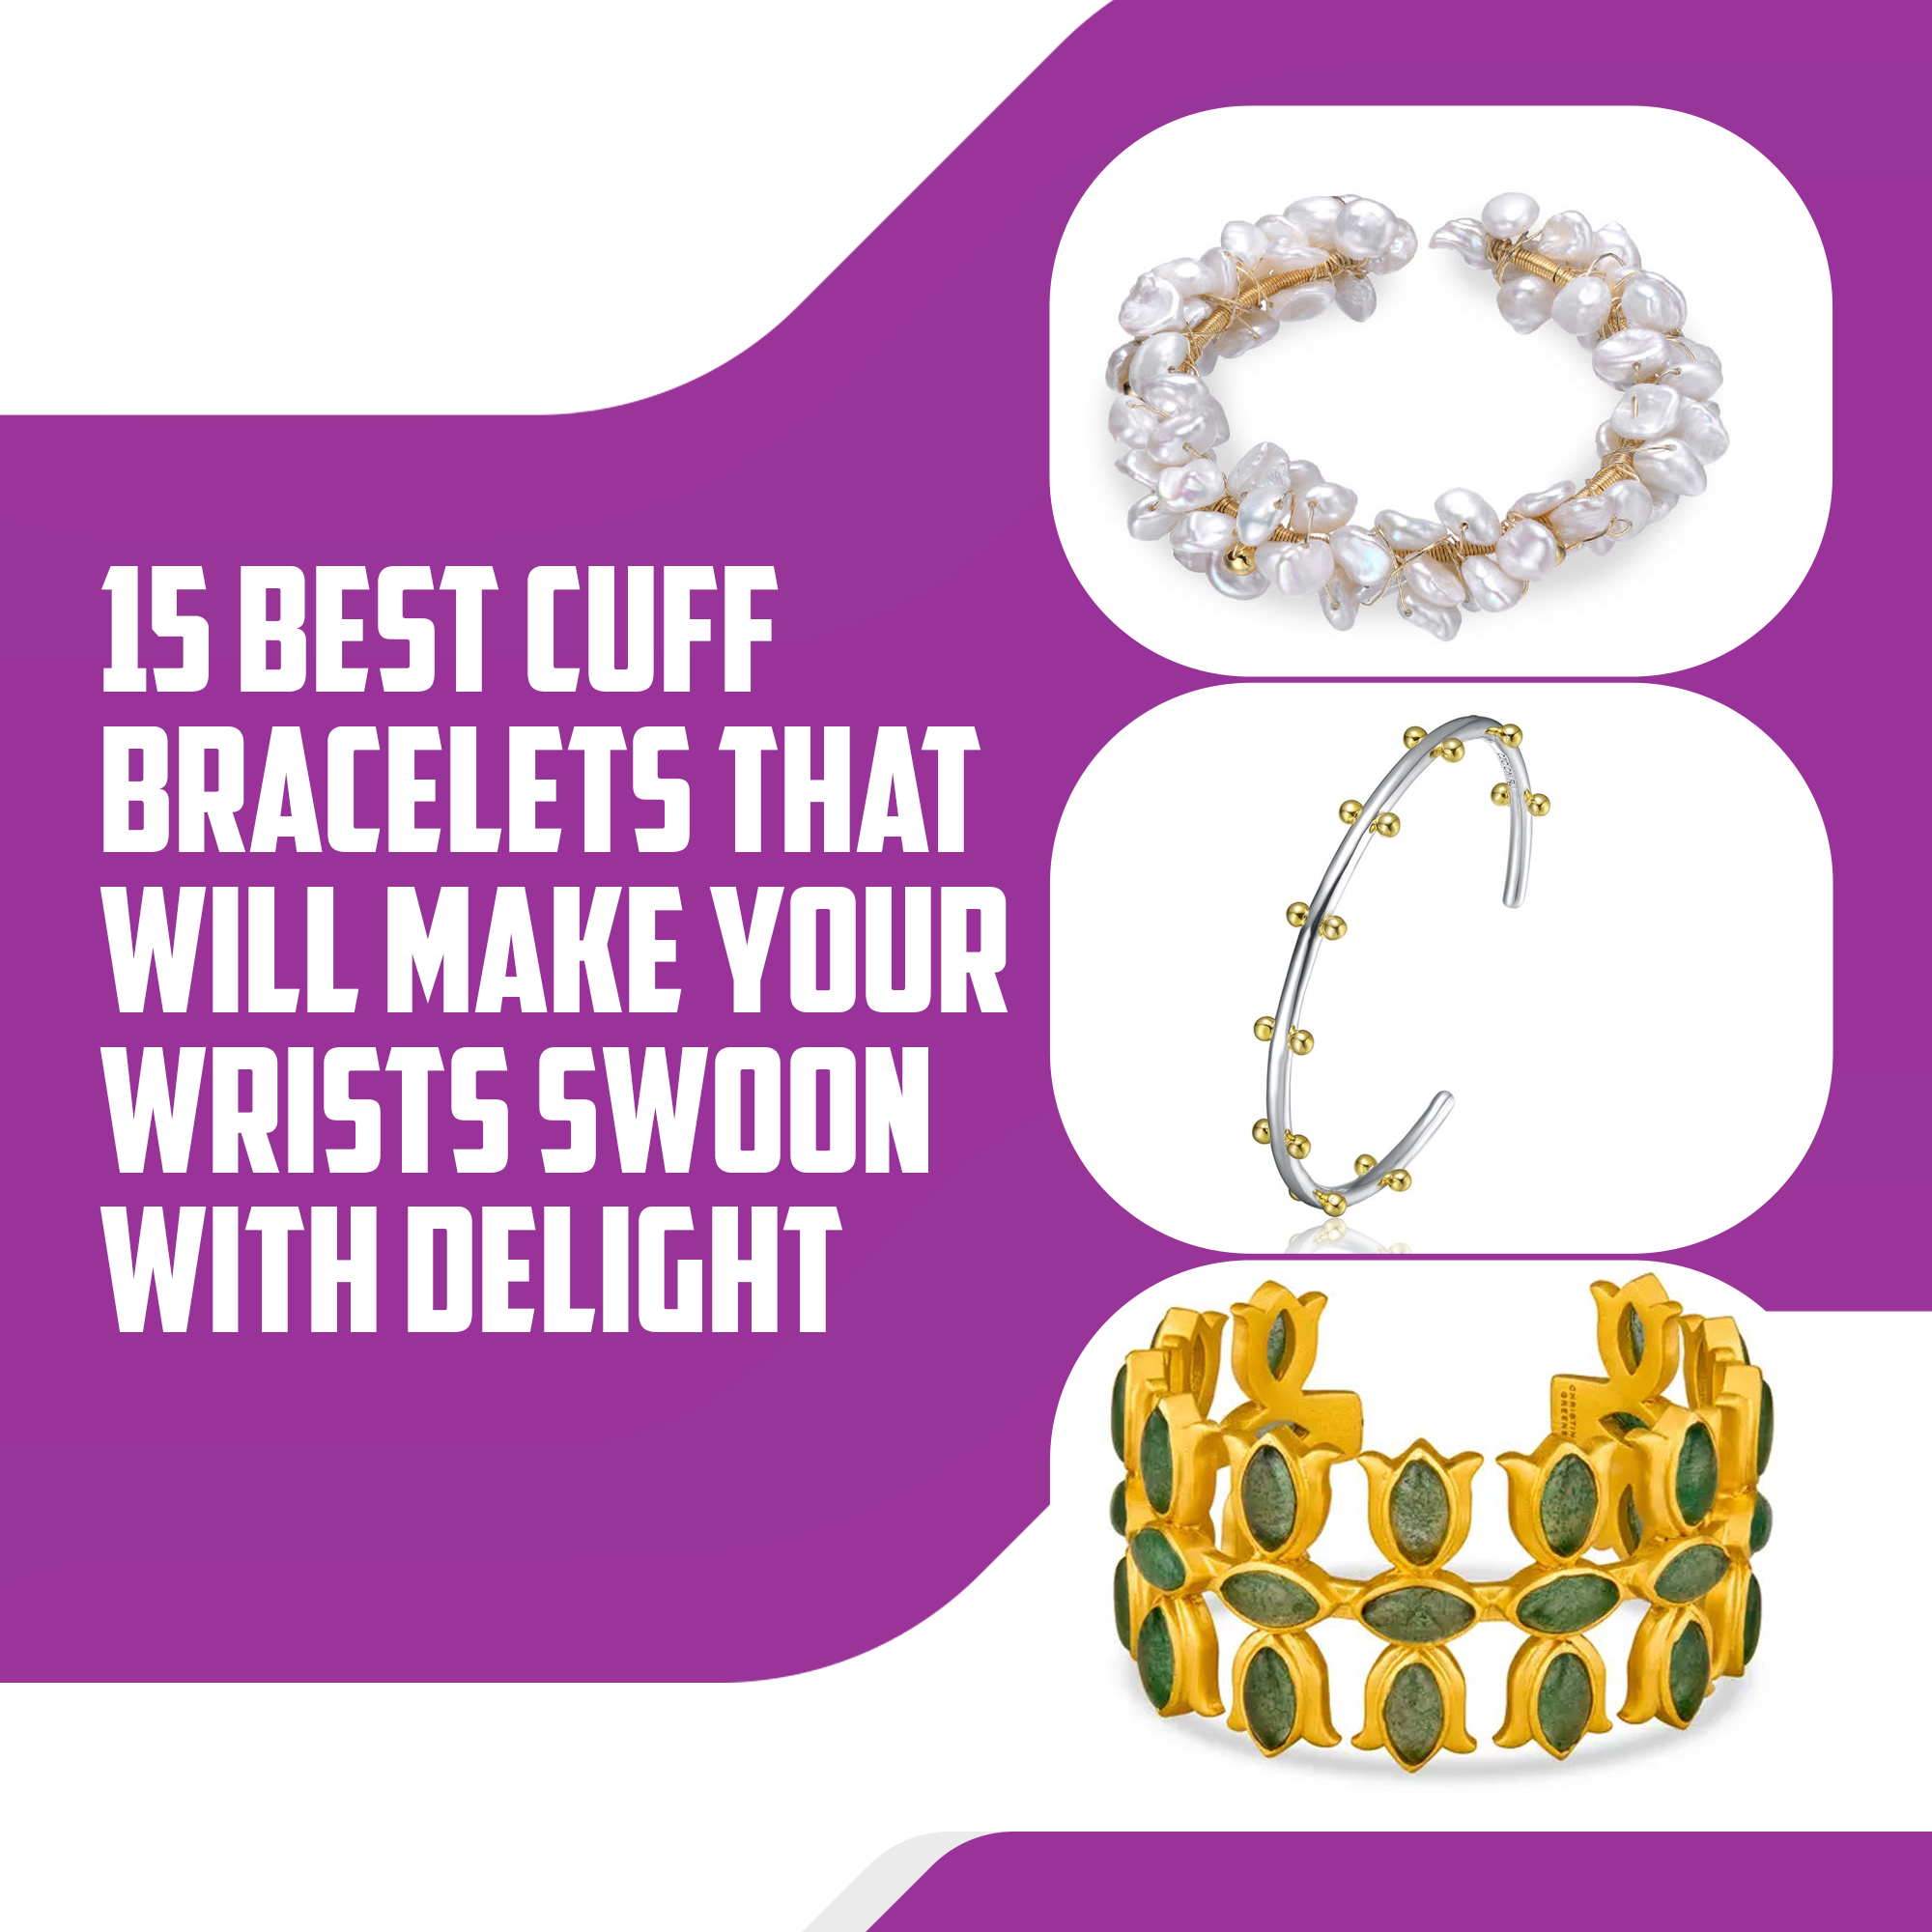 15 Best Cuff Bracelets That will Make Your Wrists Swoon with Delight